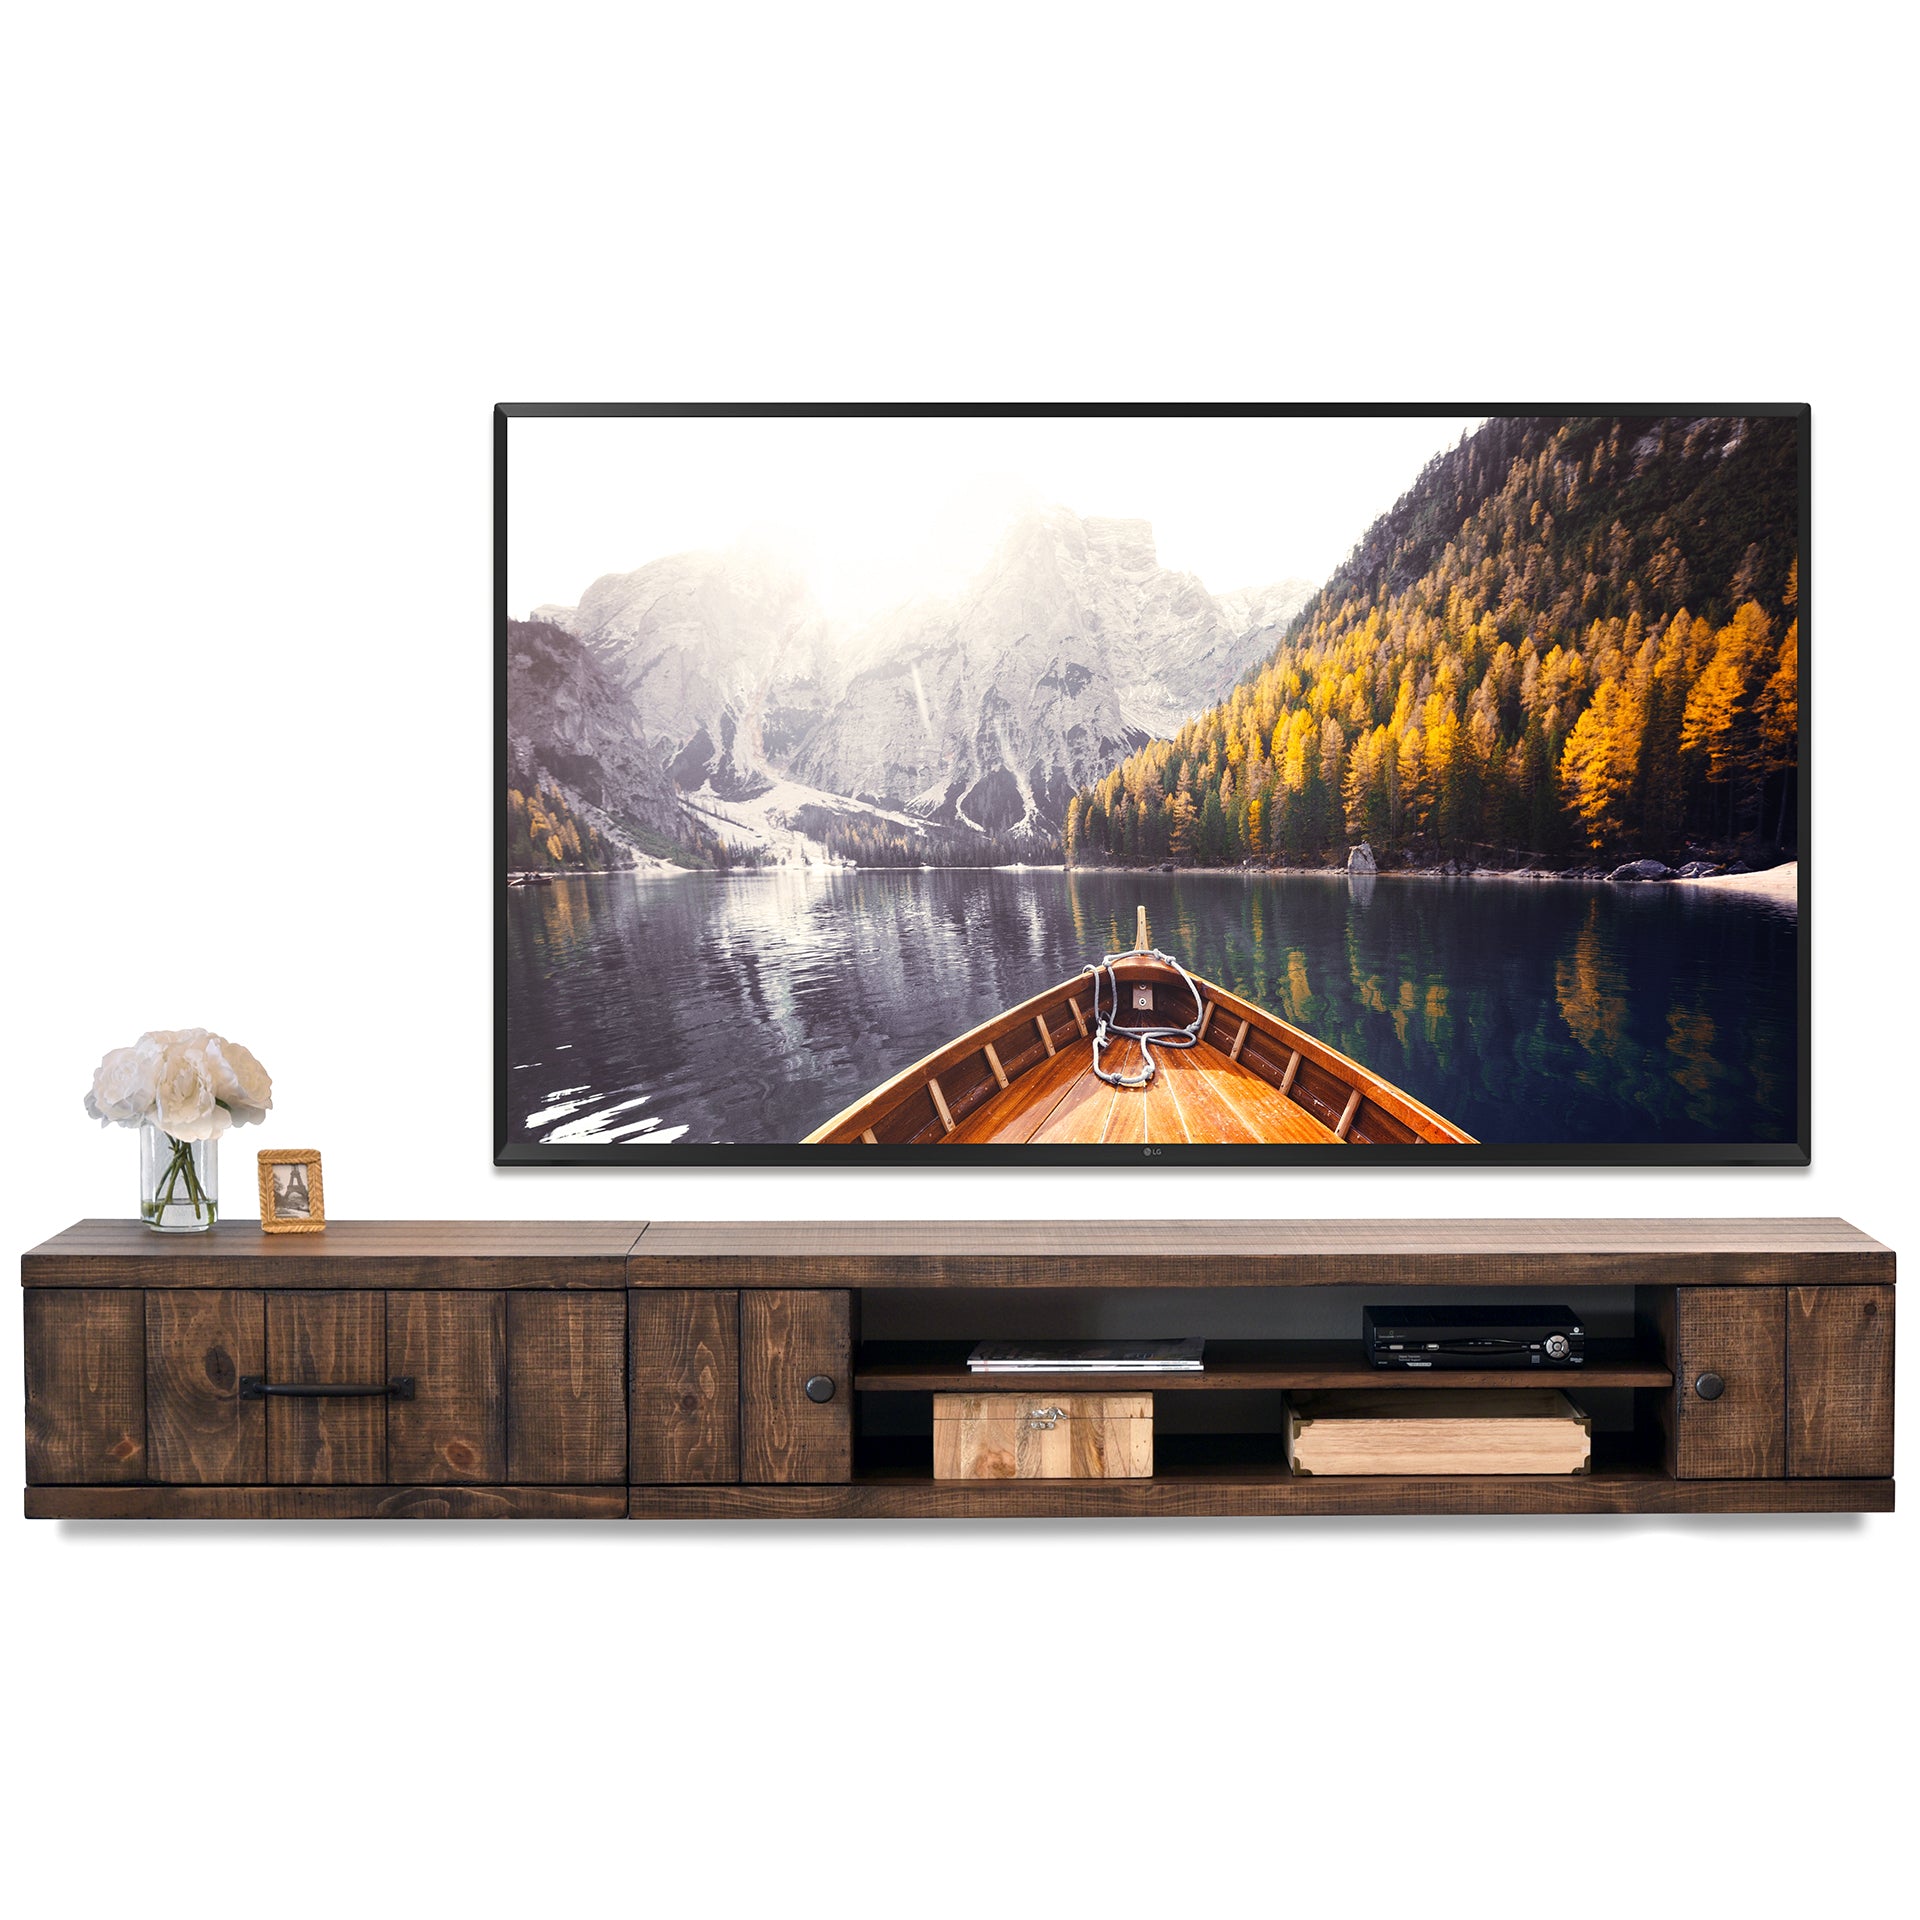 Rustic Barn Wood Style Floating TV Stand Wall Mount Entertainment Center - Farmhouse - Spice